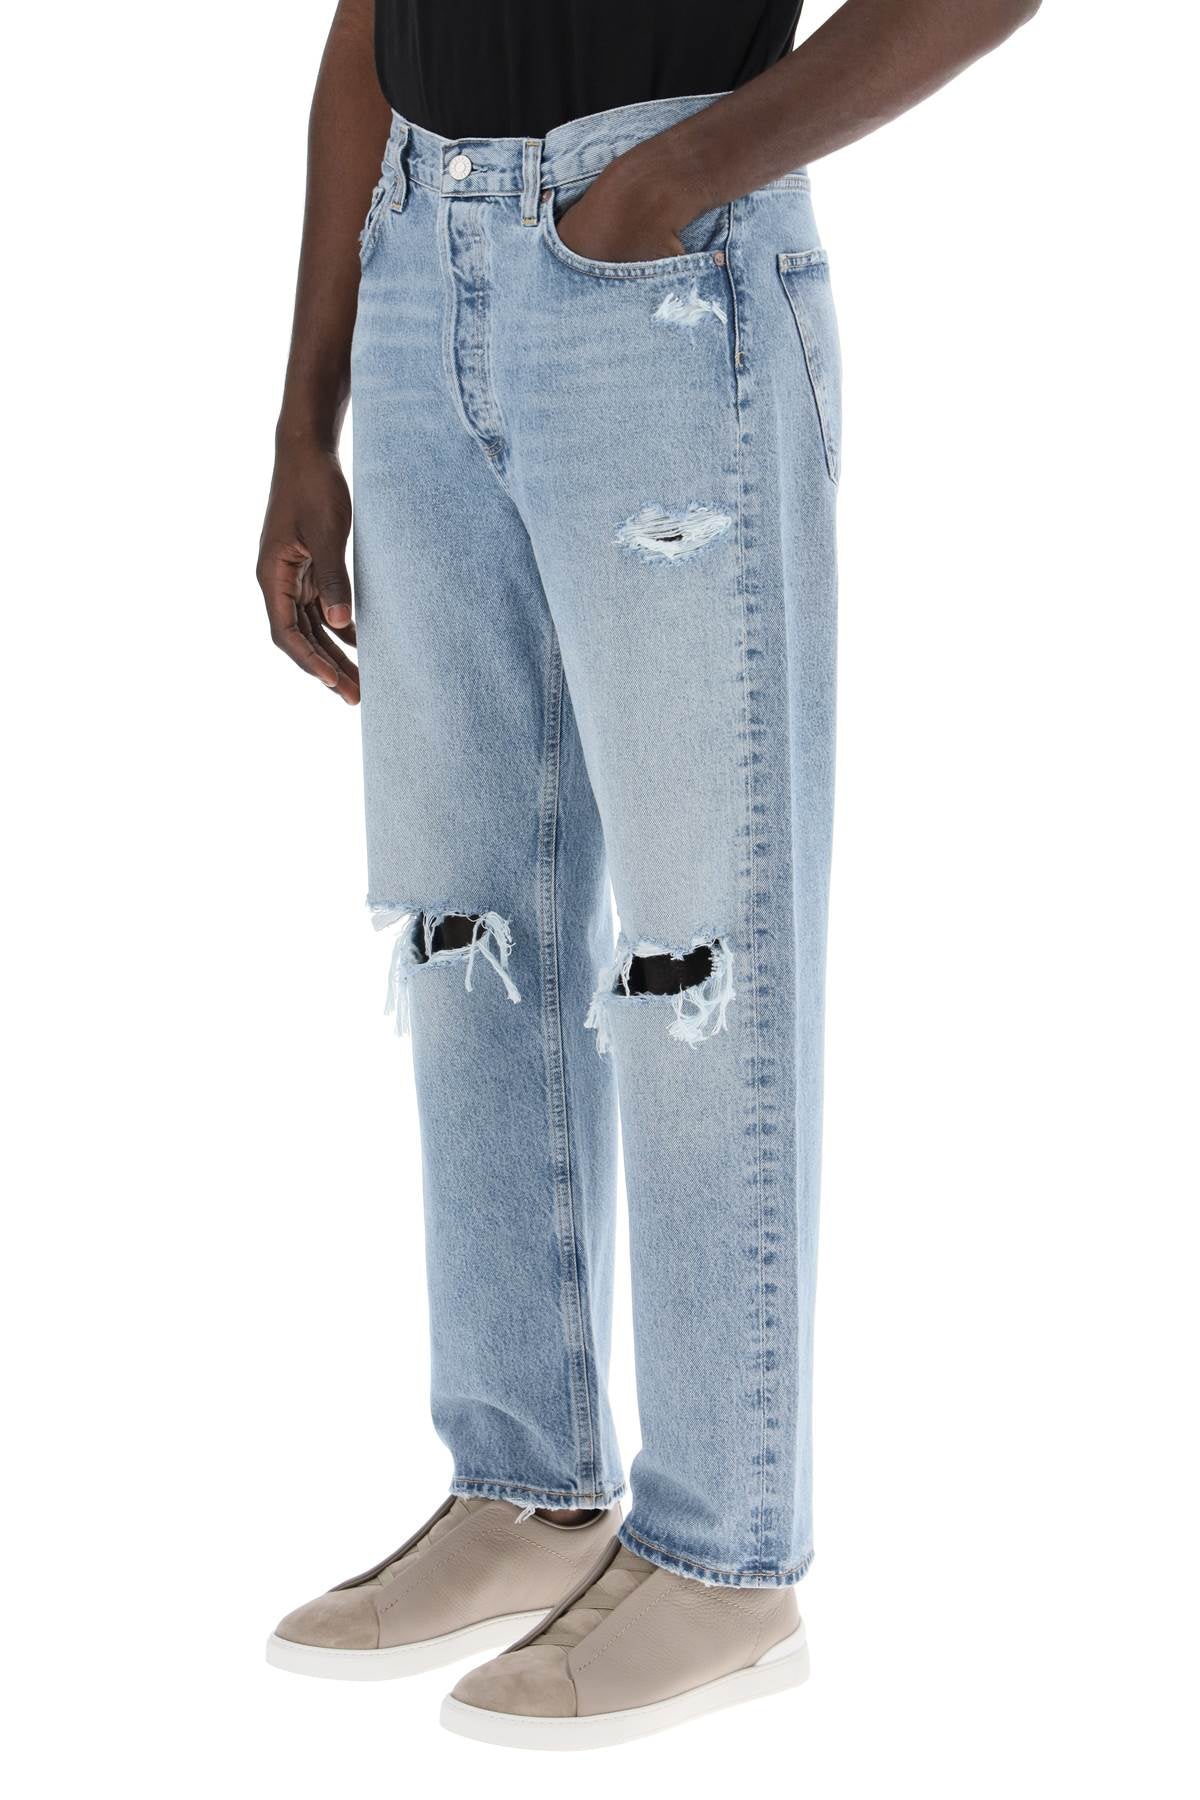 Agolde 90's destroyed jeans with distressed details-3